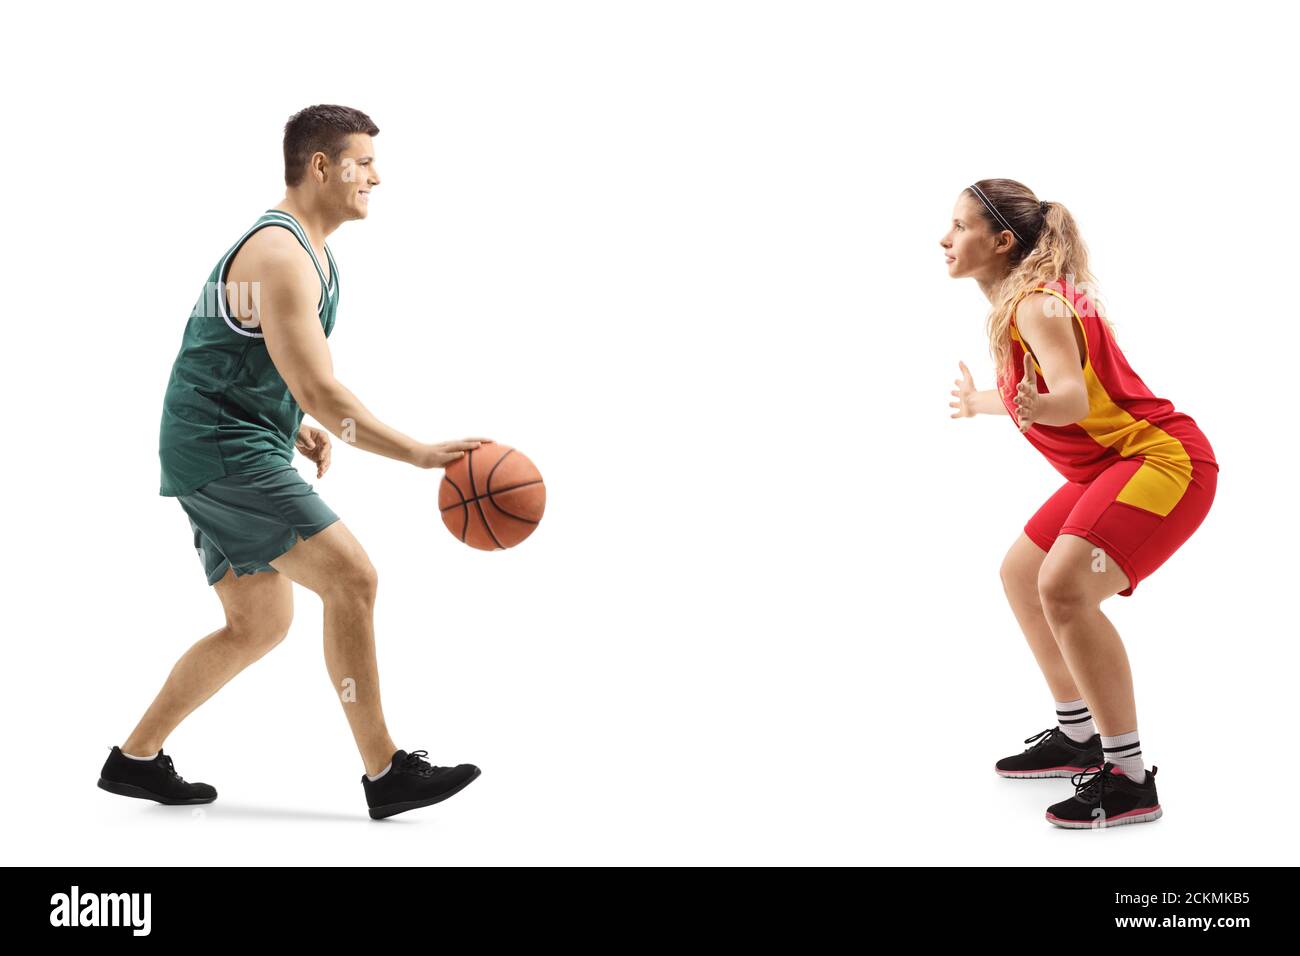 Girl Playing Basketball Cut Out Stock Images & Pictures - Alamy